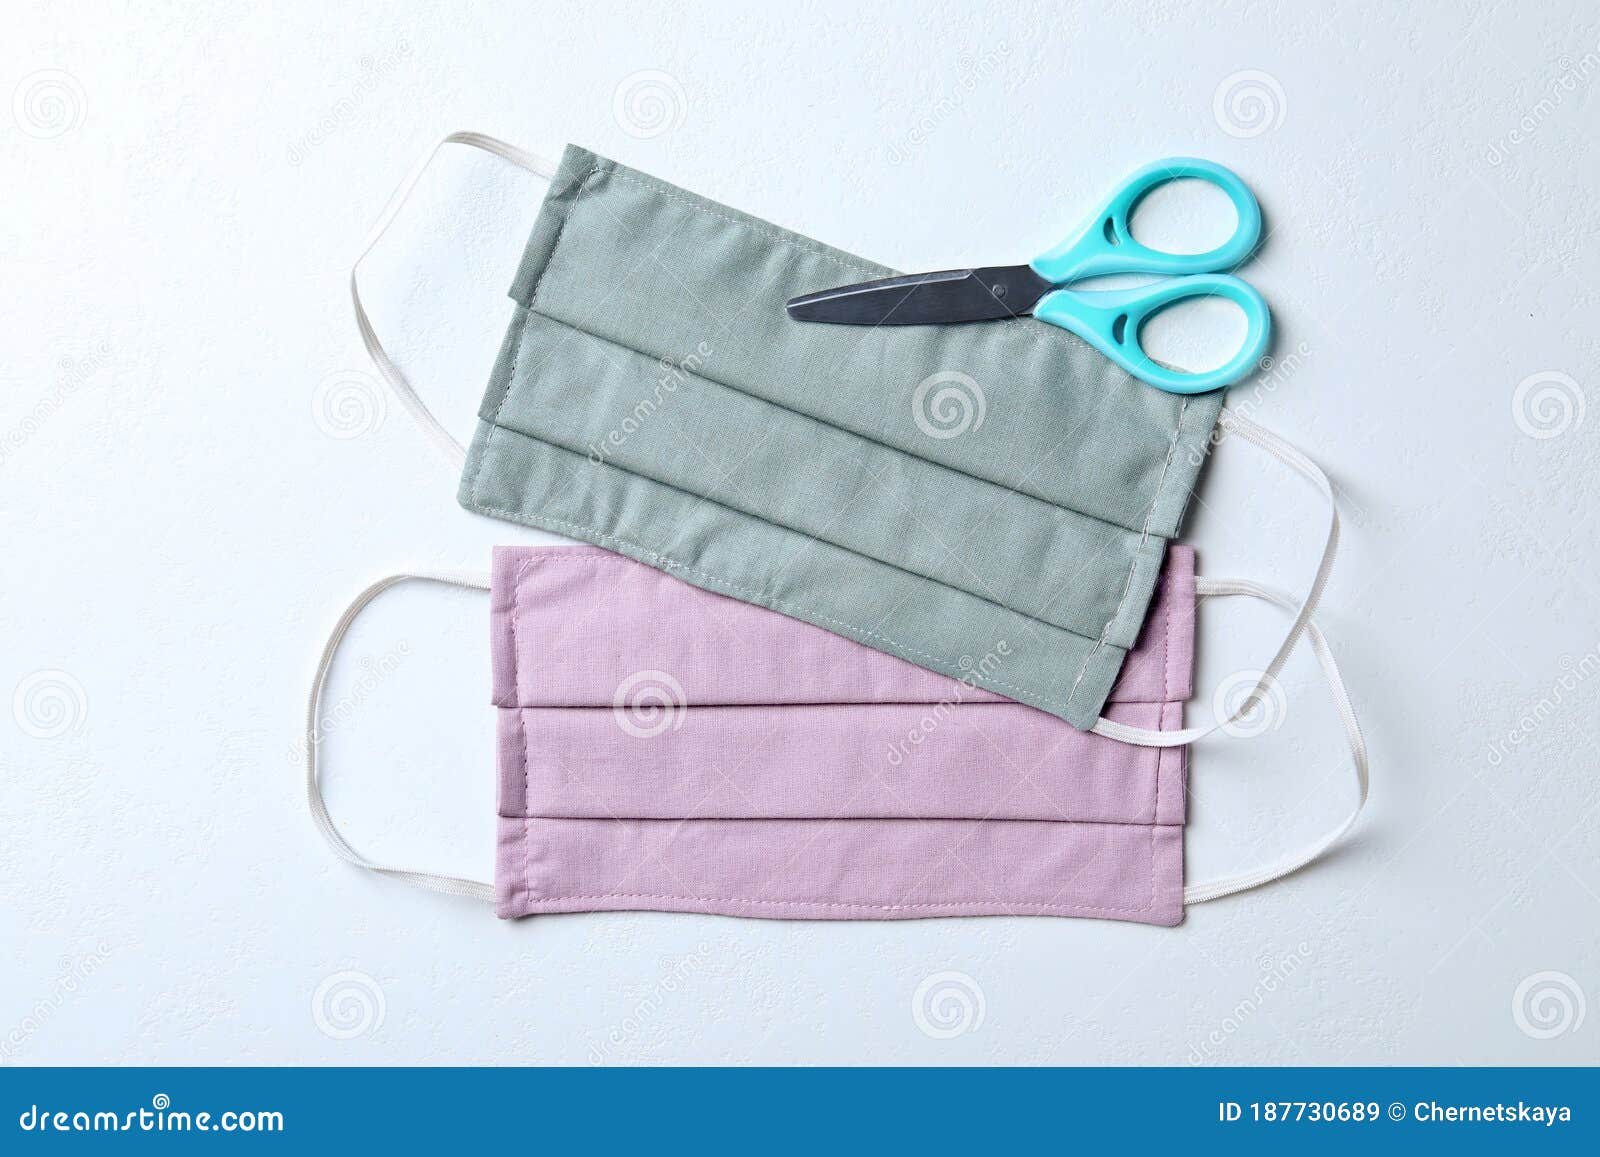 Homemade Protective Masks and Scissors on Background, Flat Lay. Sewing ...